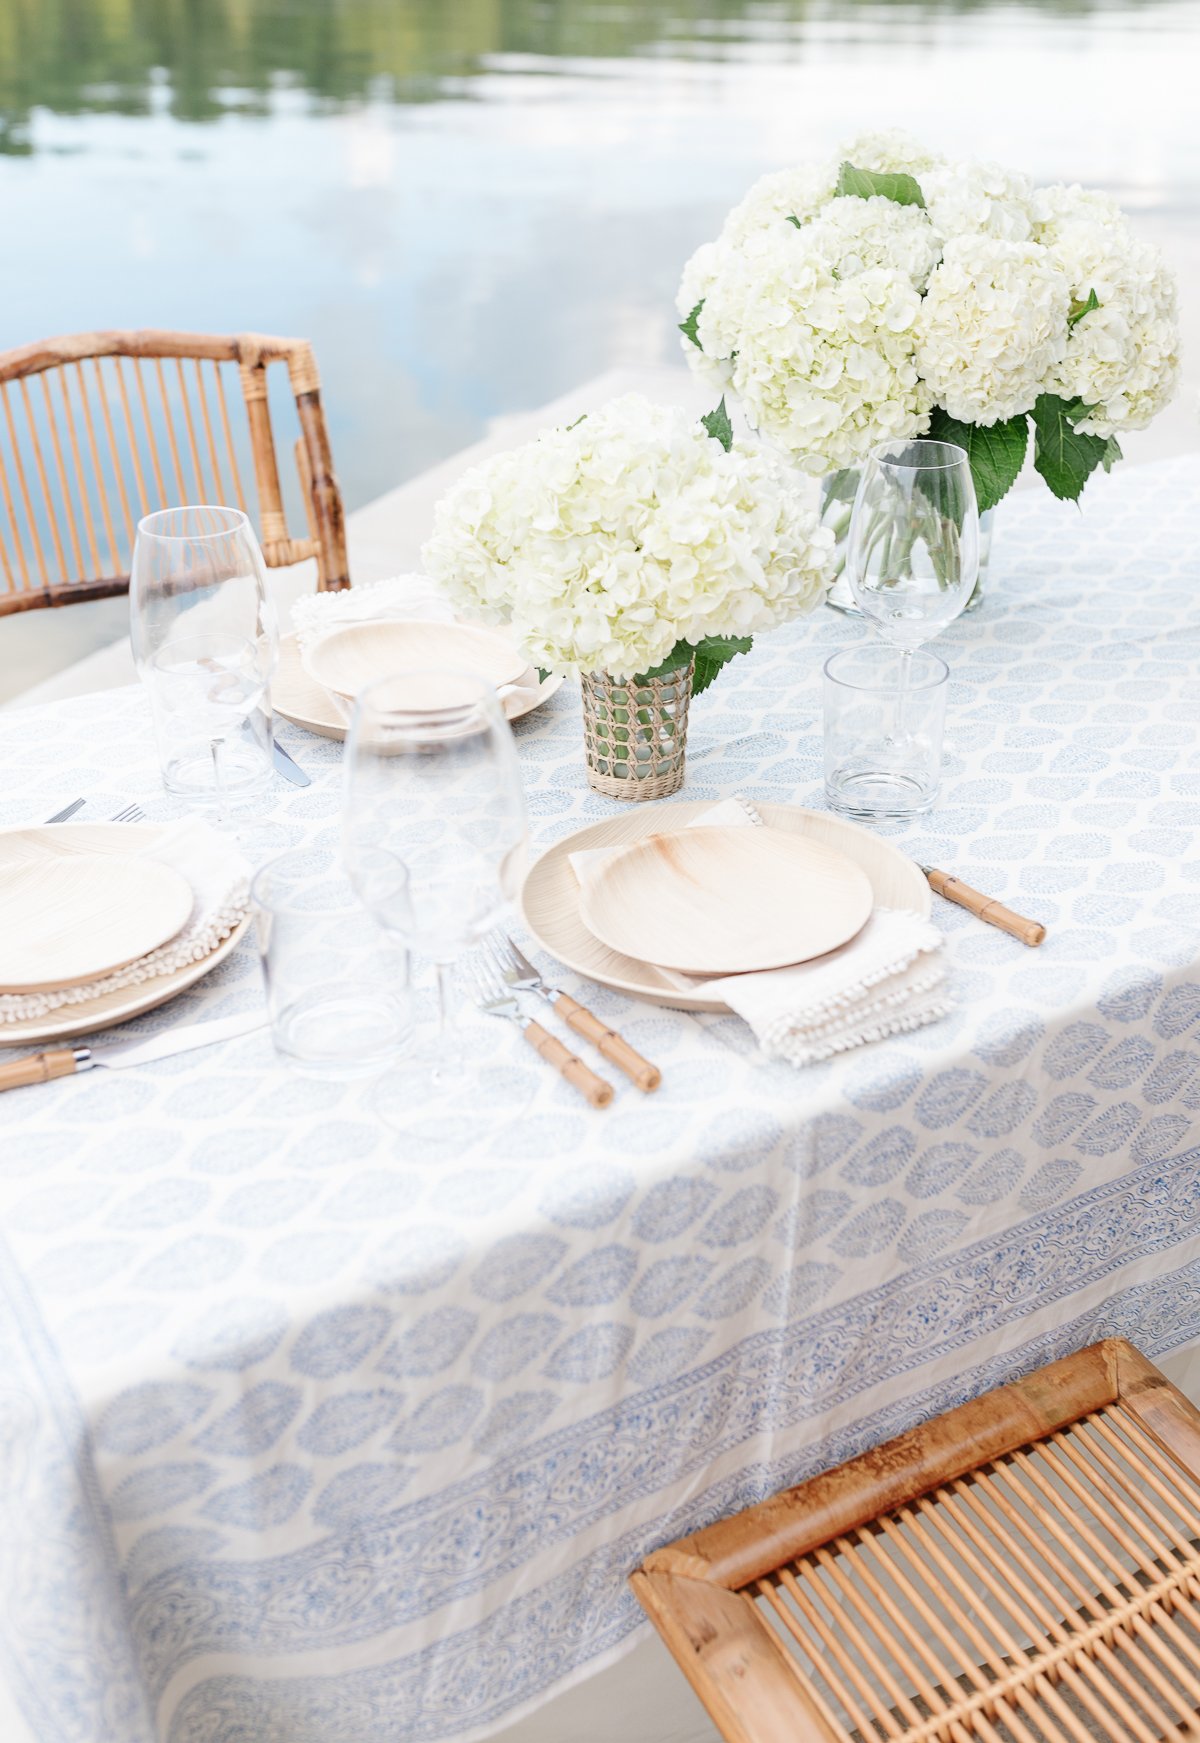 Elegant outdoor dining setup with a blue lace tablecloth, white hydrangea centerpieces, and bamboo chairs, showcasing a serene and stylish table arrangement.